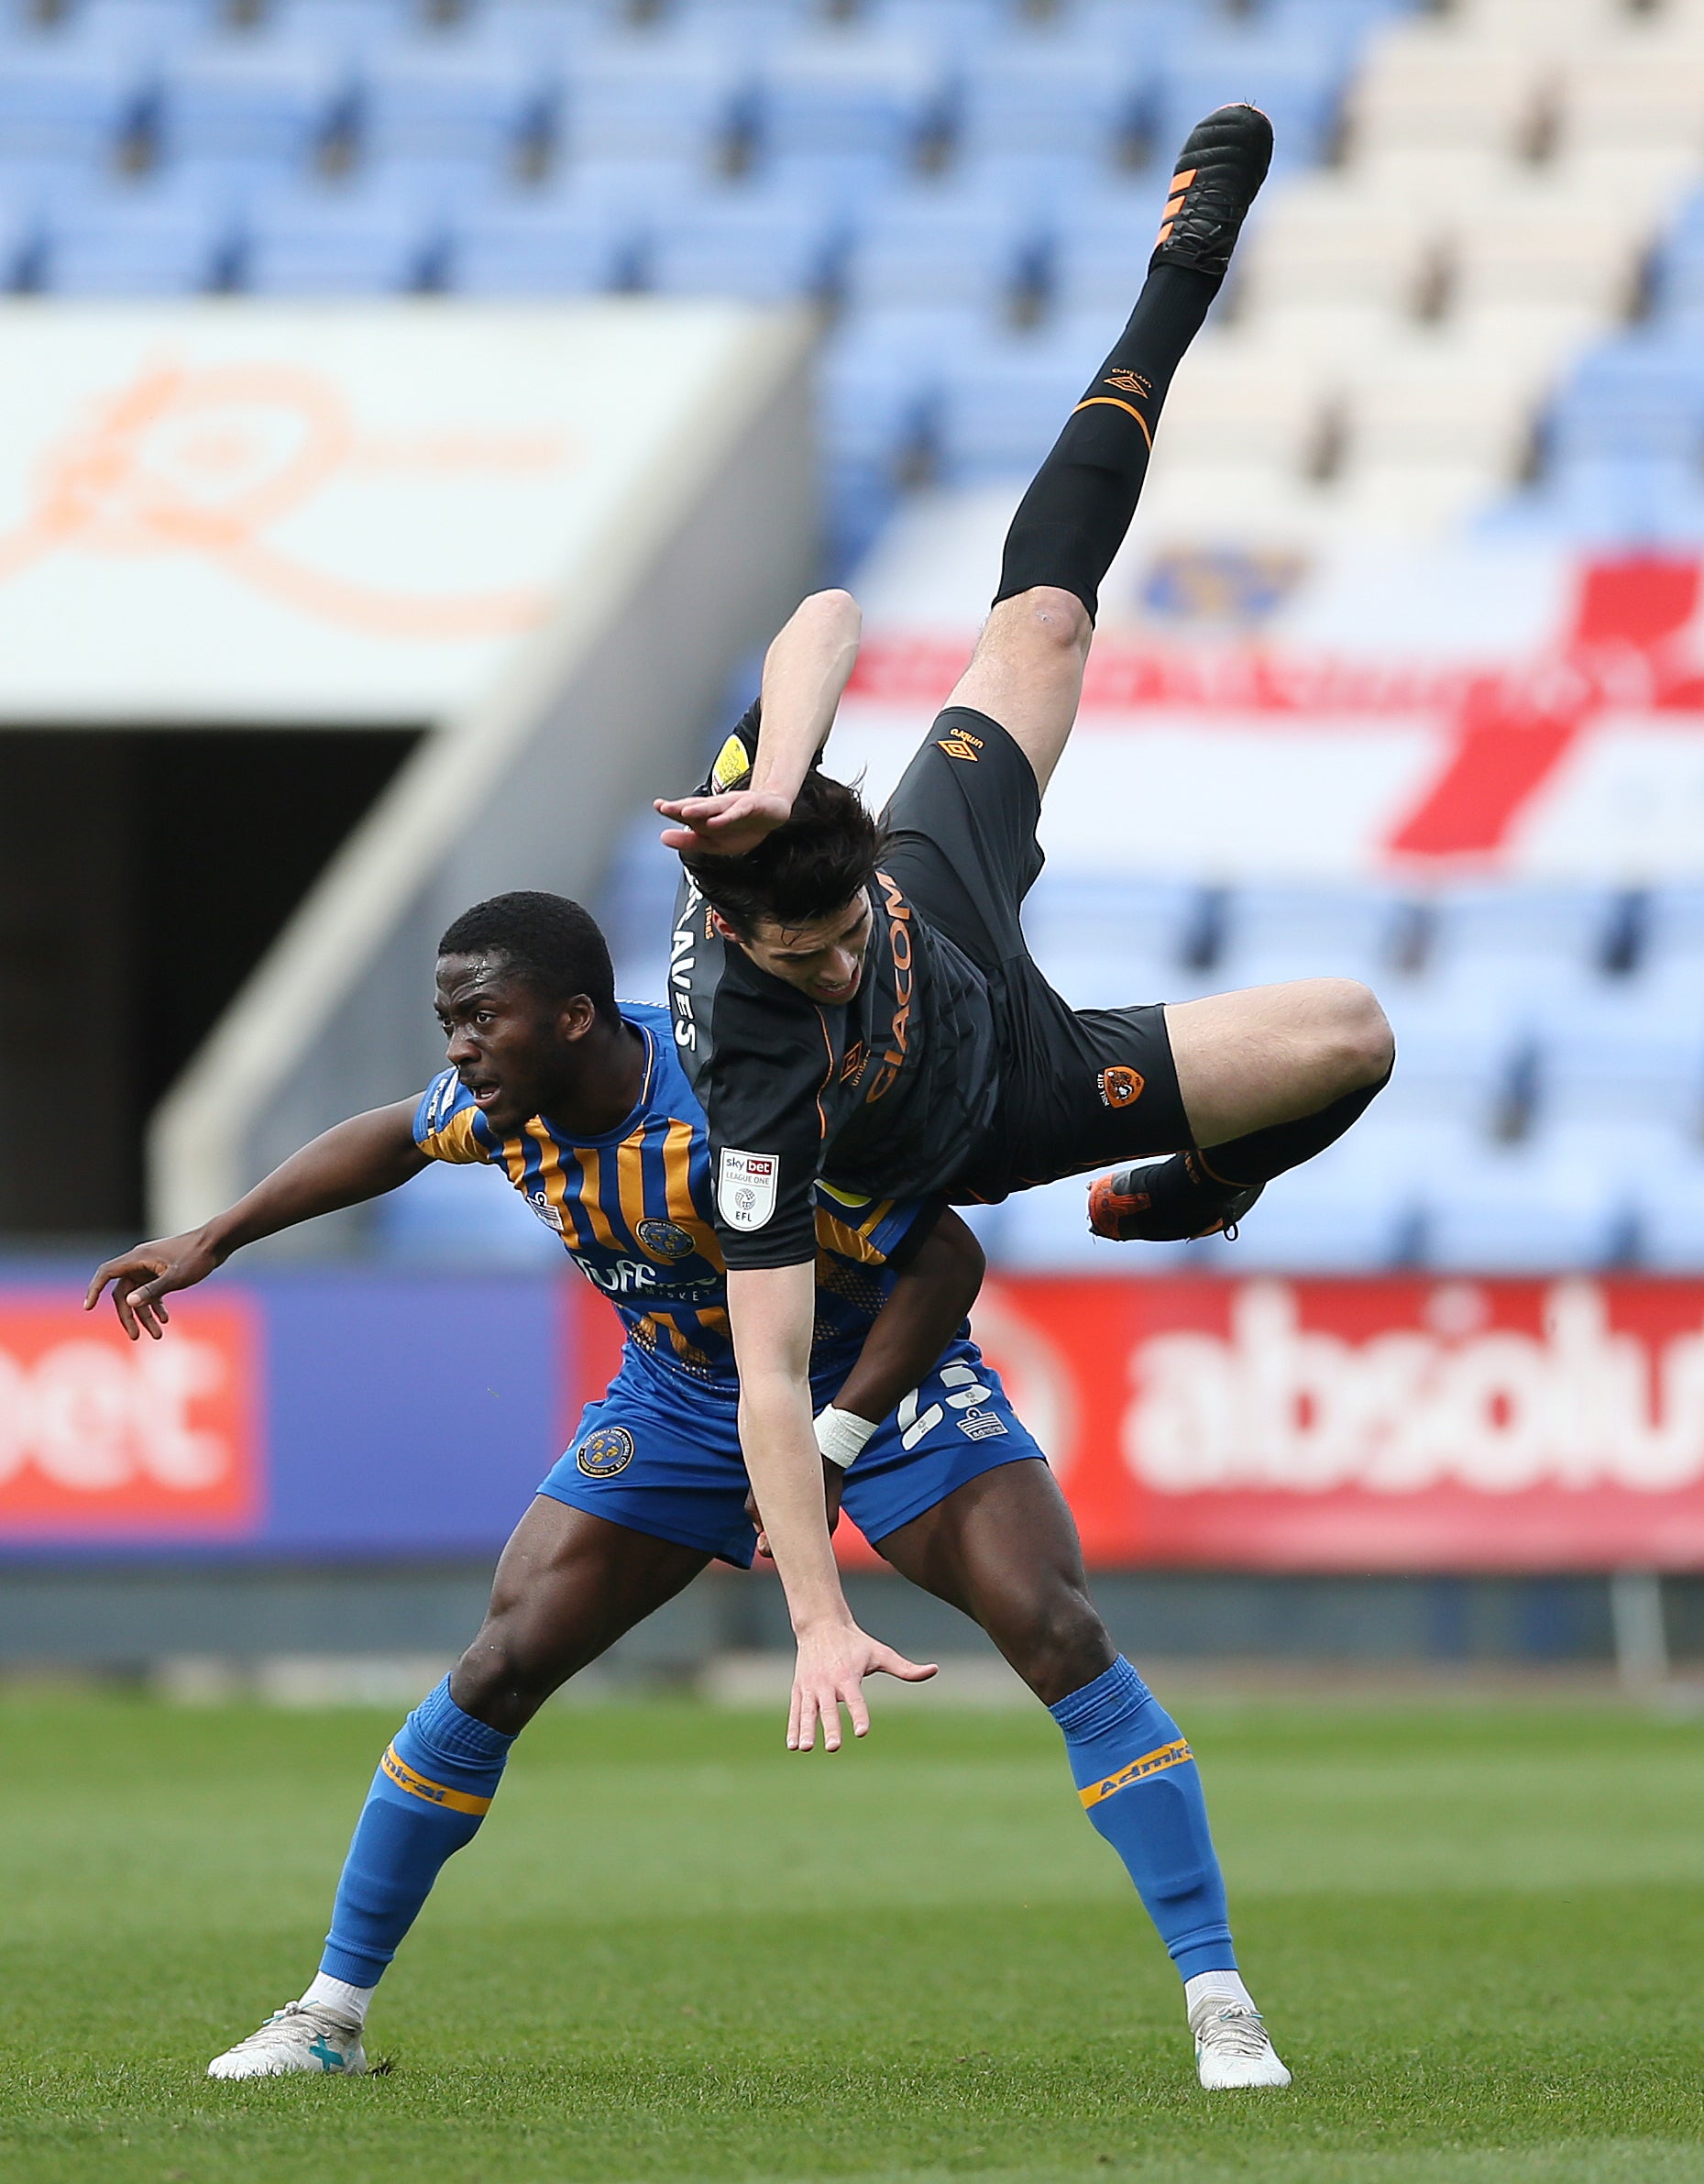 Dan Udoh has signed a new two-year extension with Shrewsbury